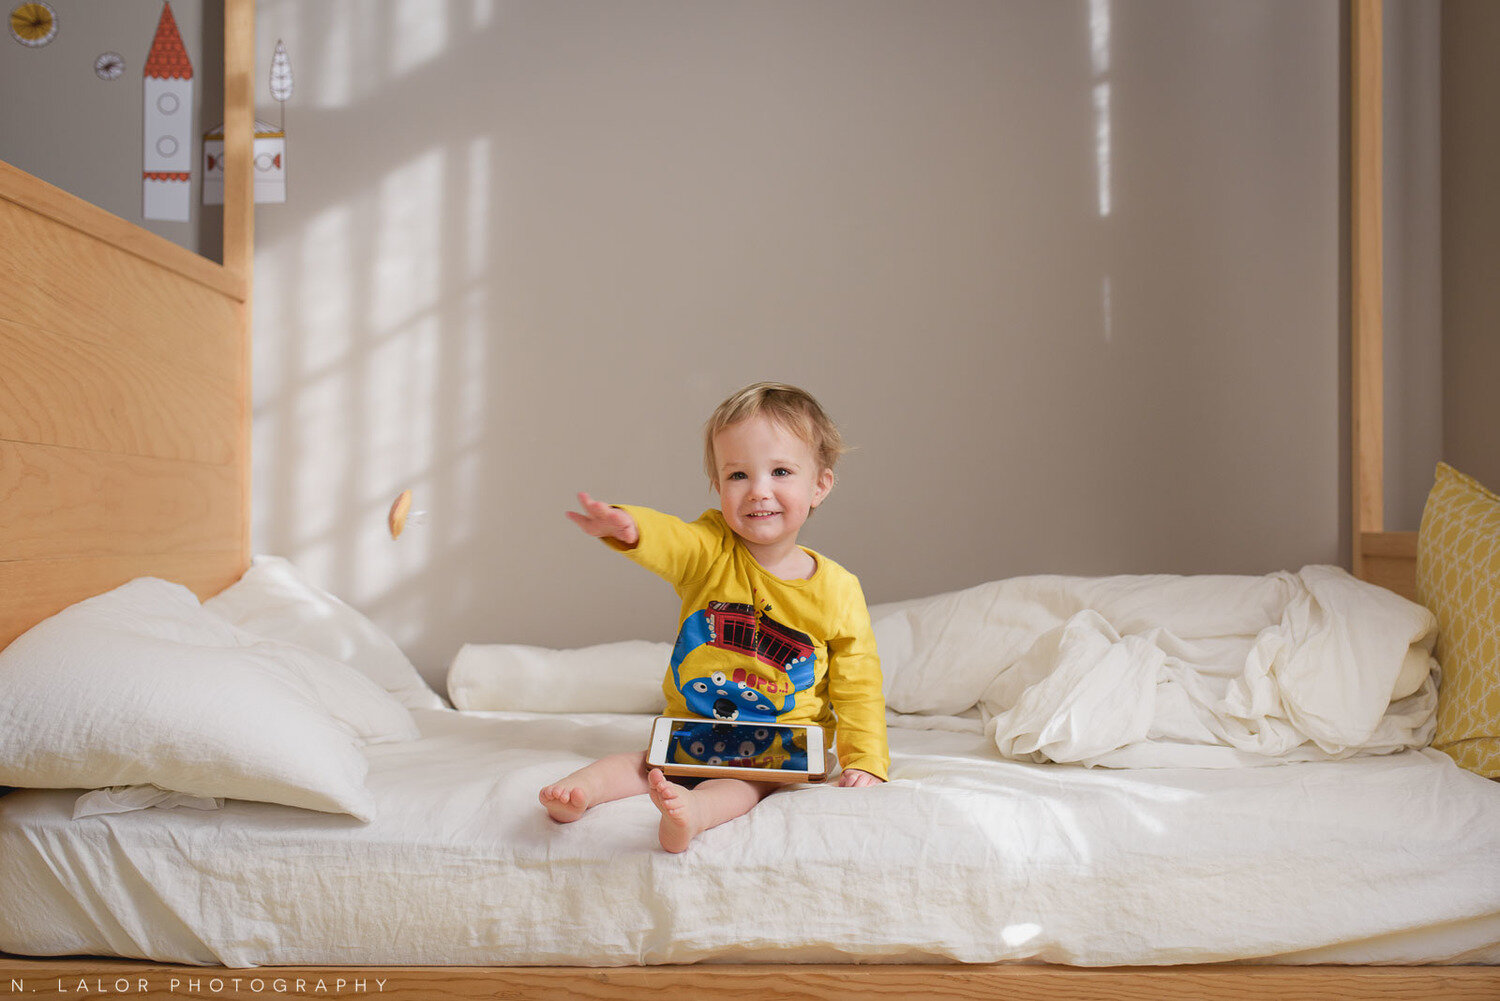 nlalor-photography-2016-yellow-room-with-toddler-at-home-7.jpg